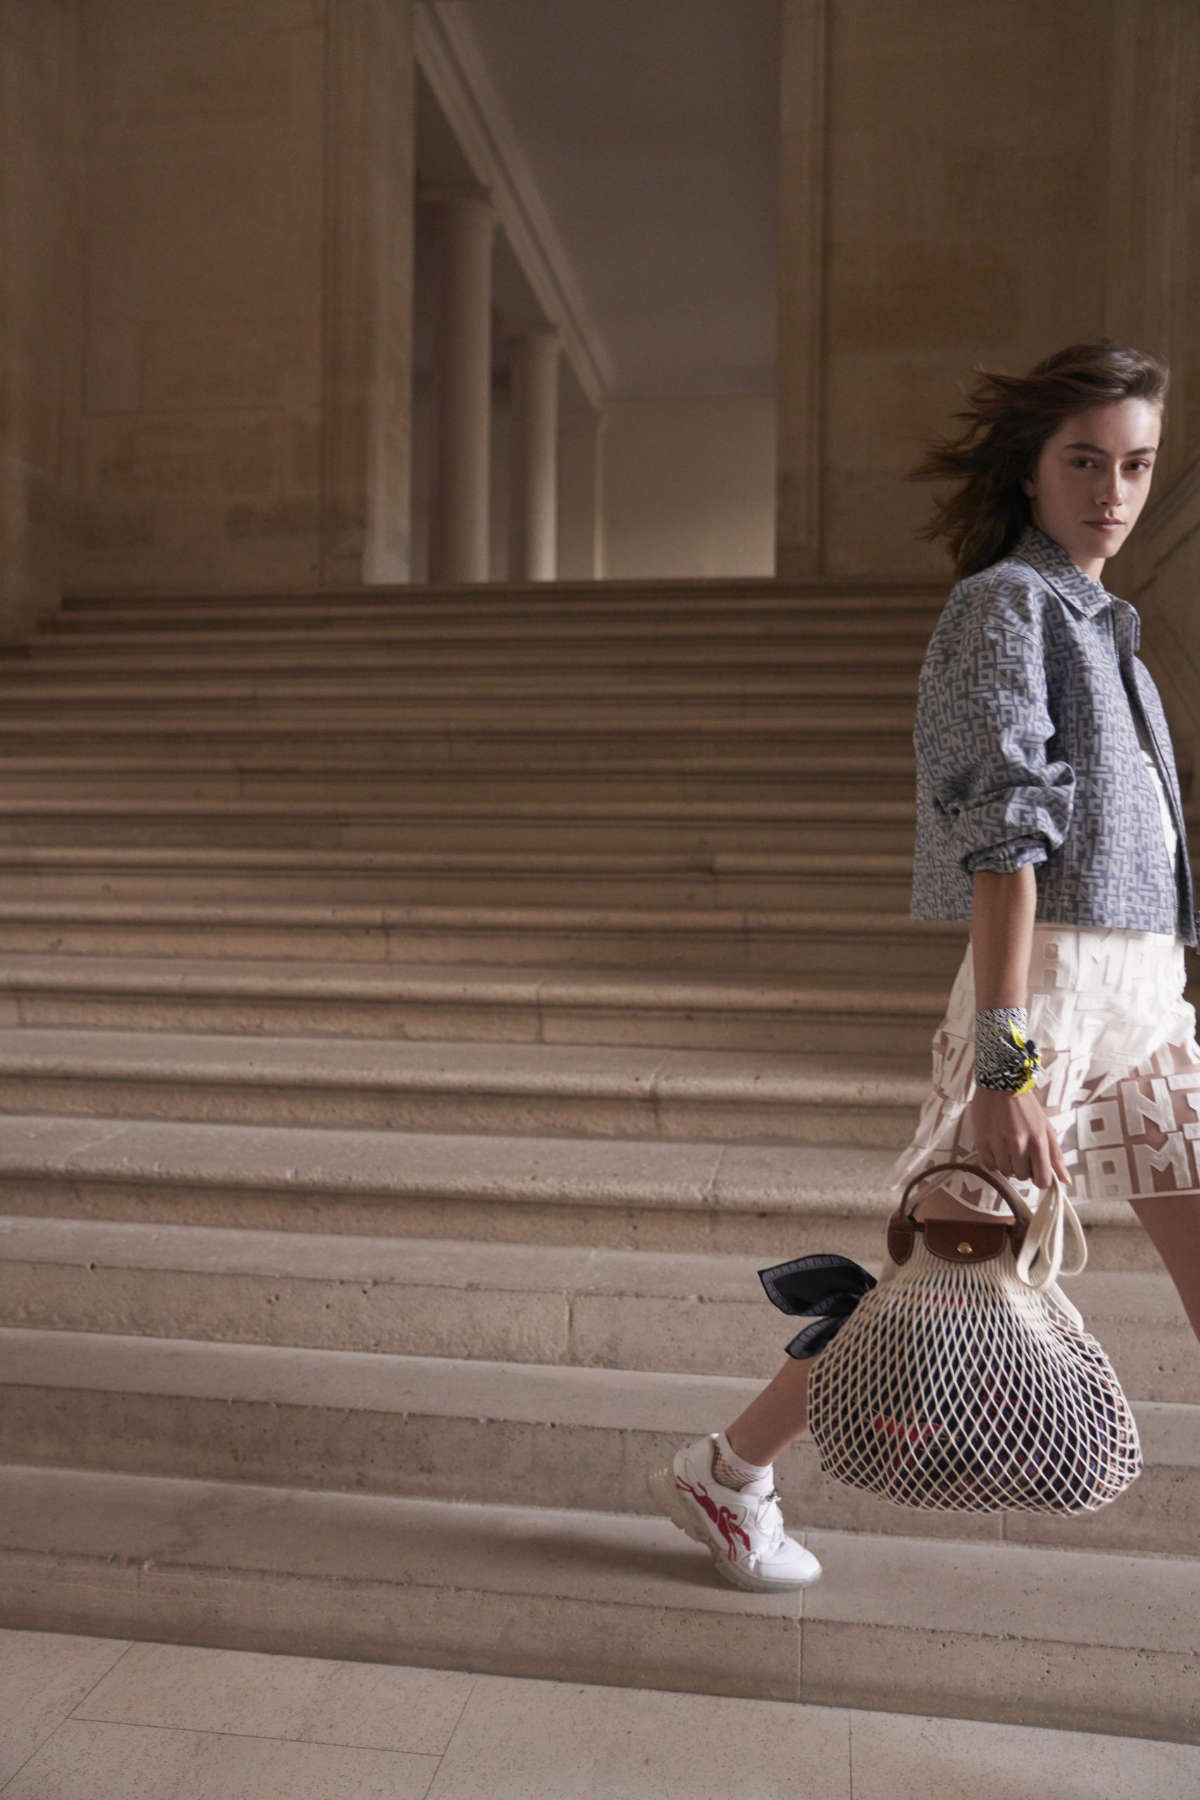 Longchamp's new bags for AW21 are the epitome of Parisian chic